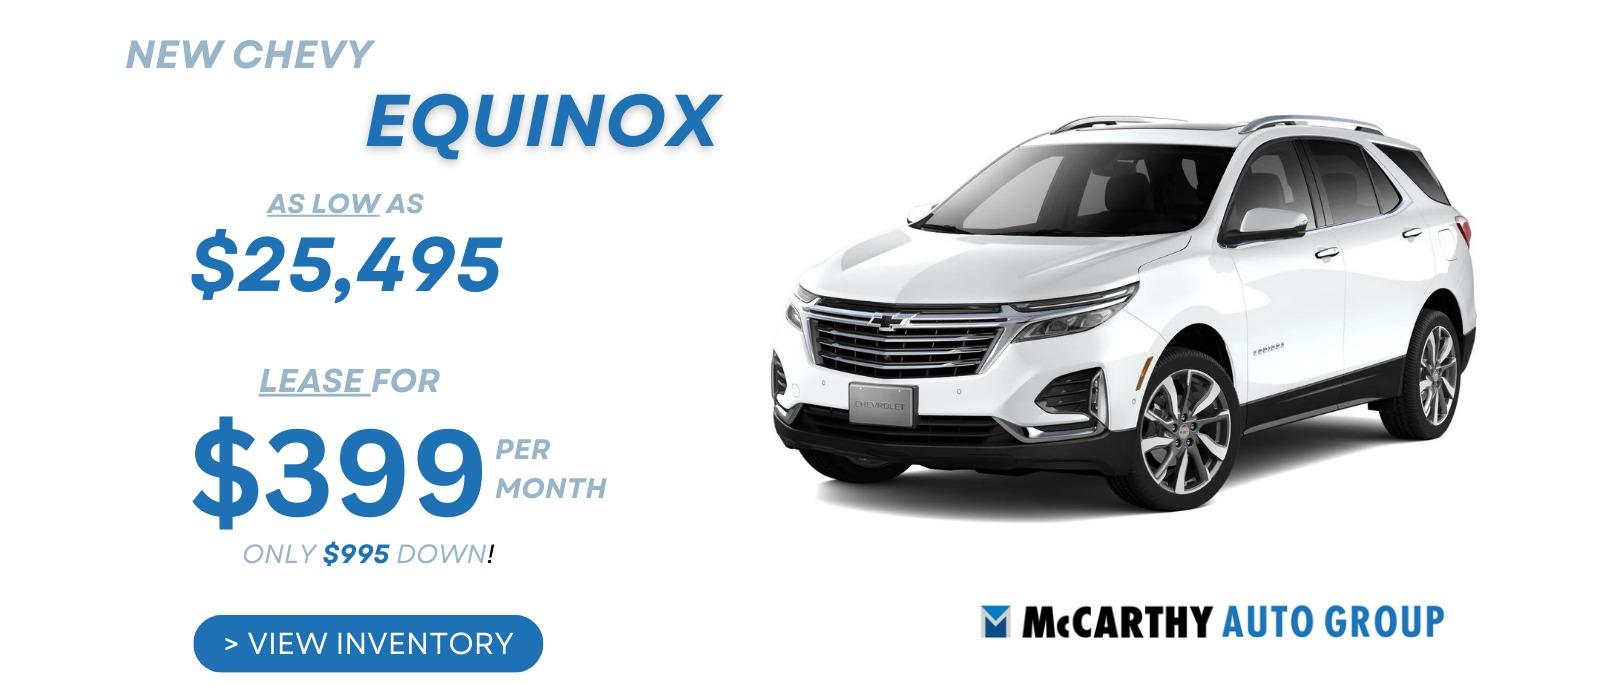 NEW EQUINOX FOR LEASE NEAR ME - AS LOW AS $25,495 OR LEASE FOR AS LOW AS $399 PER MONTH ONLY $995 DOWN